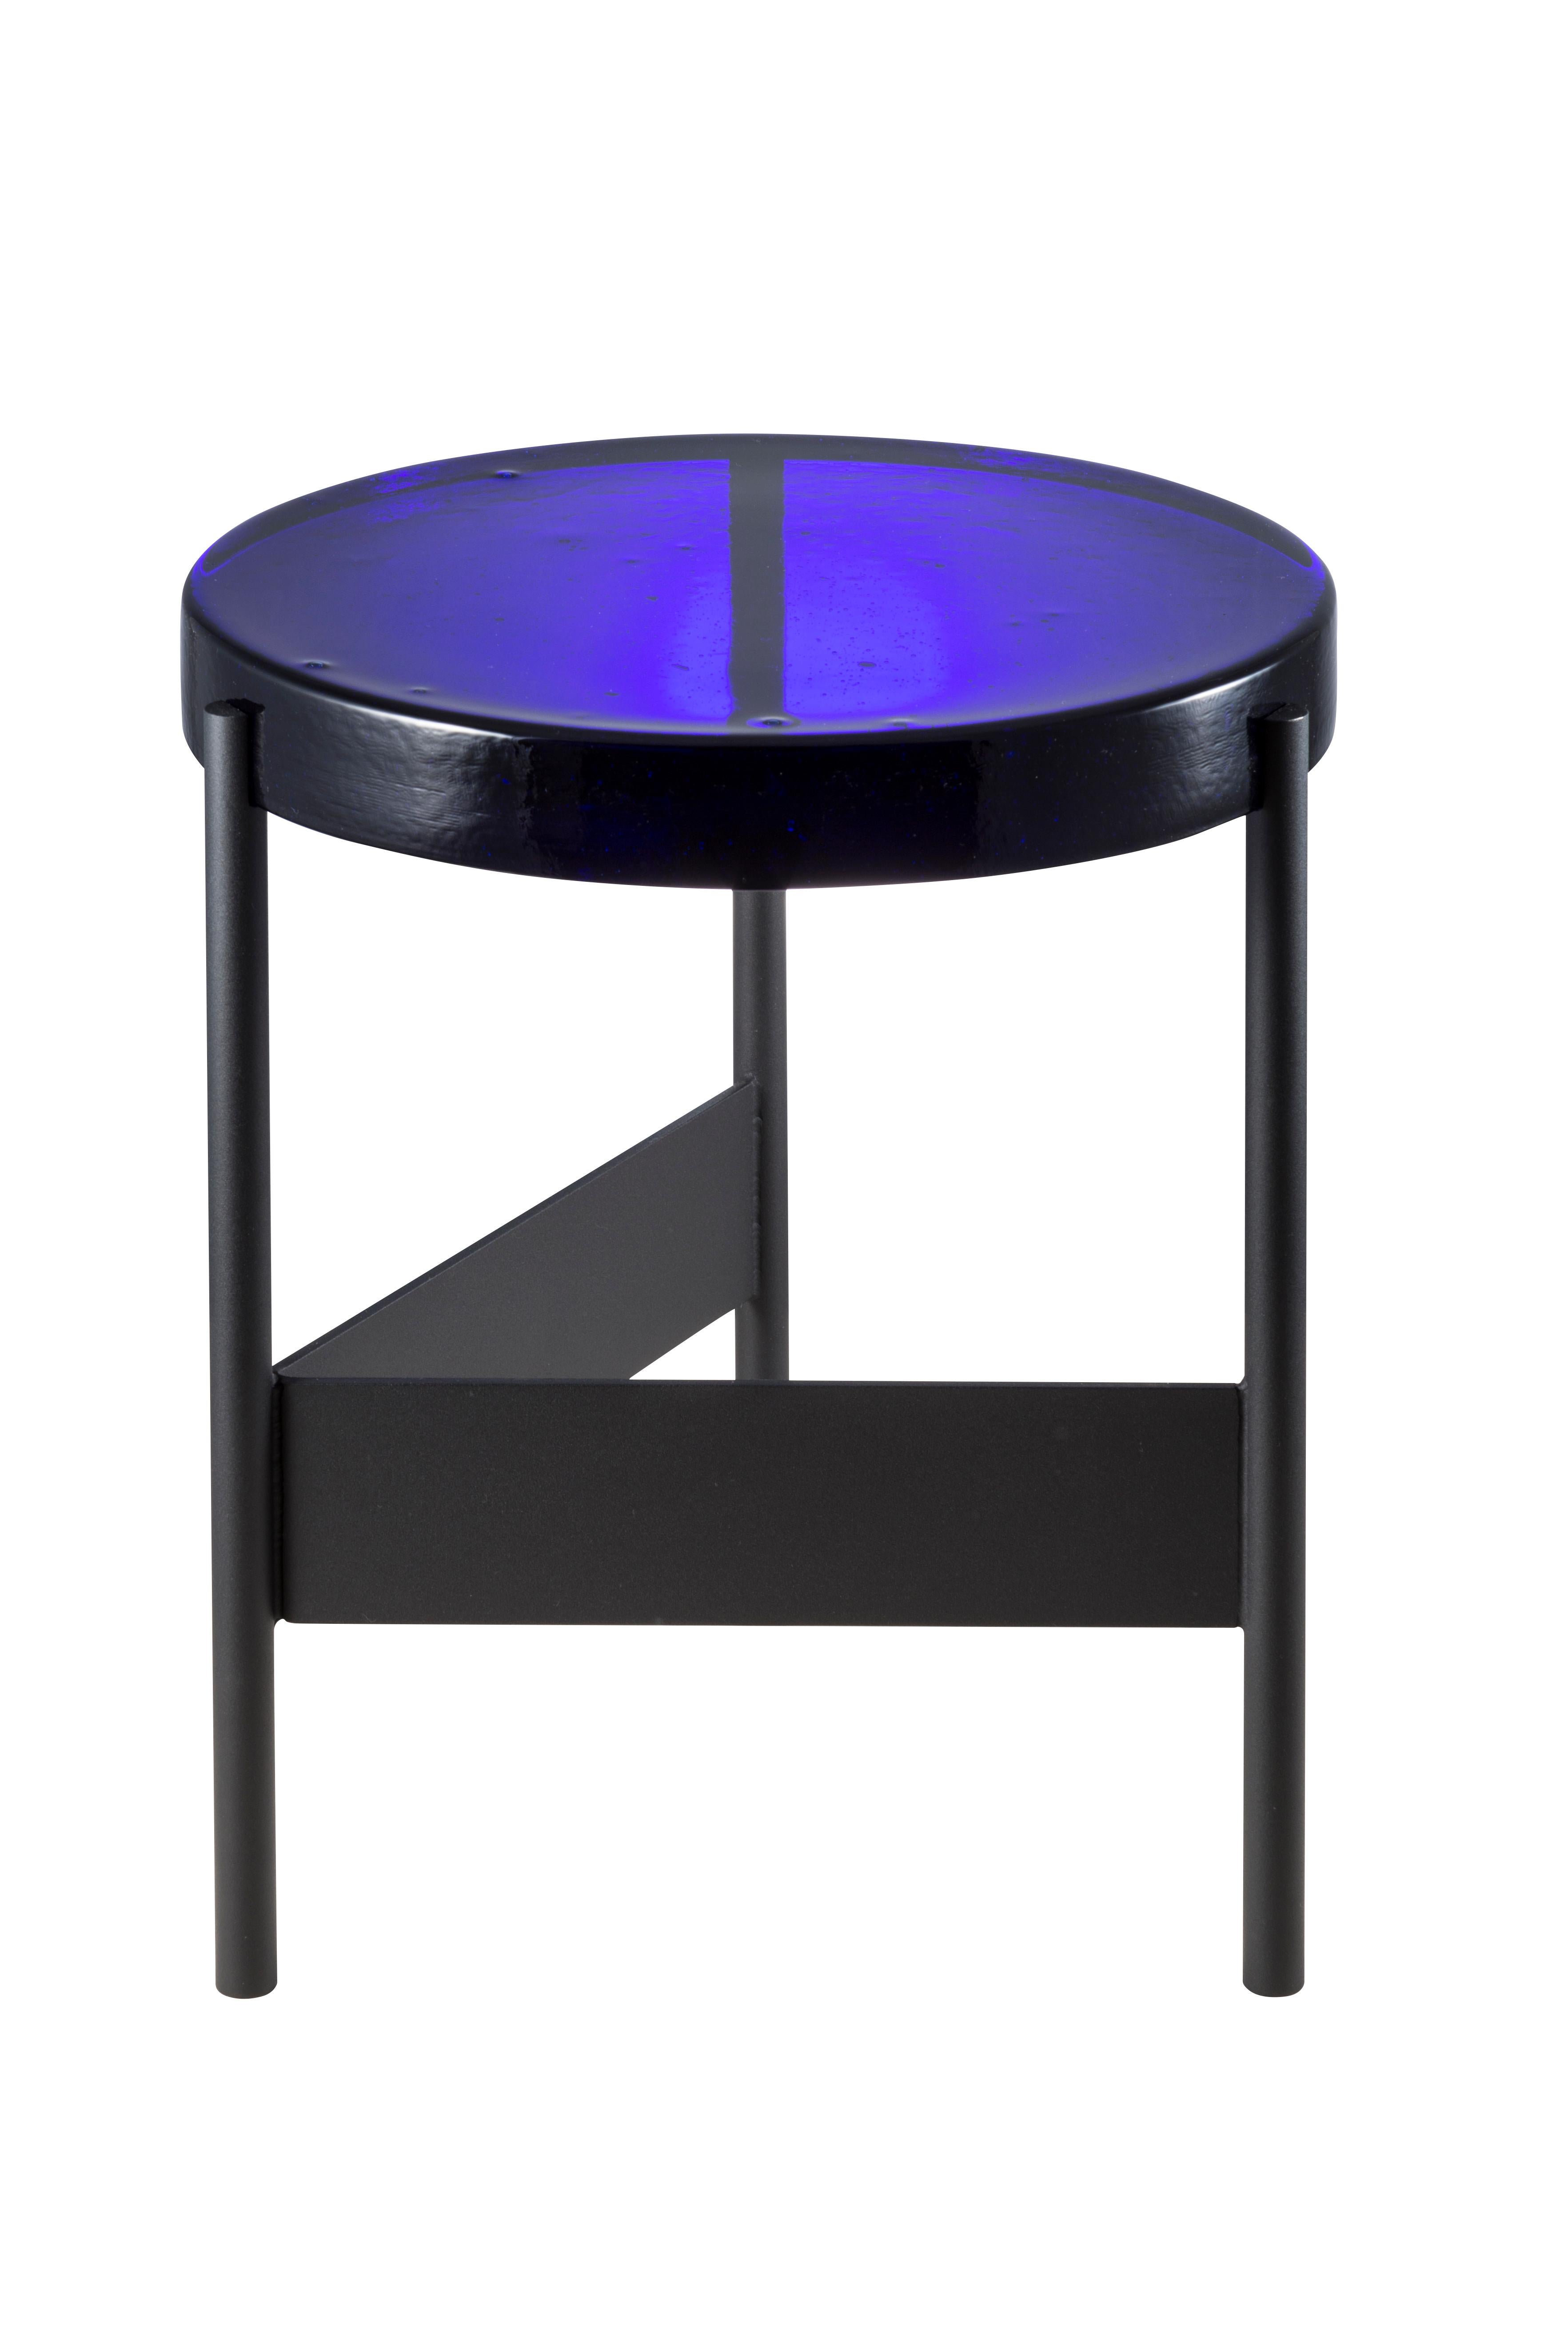 Alwa two blue black side table by Pulpo
Dimensions: D38 x H44 cm
Materials: casted glass; powder coated steel 

Also available in different finishes. 

Normally, glass is regarded as being lightweight with sharp edges. In contrast, Sebastian